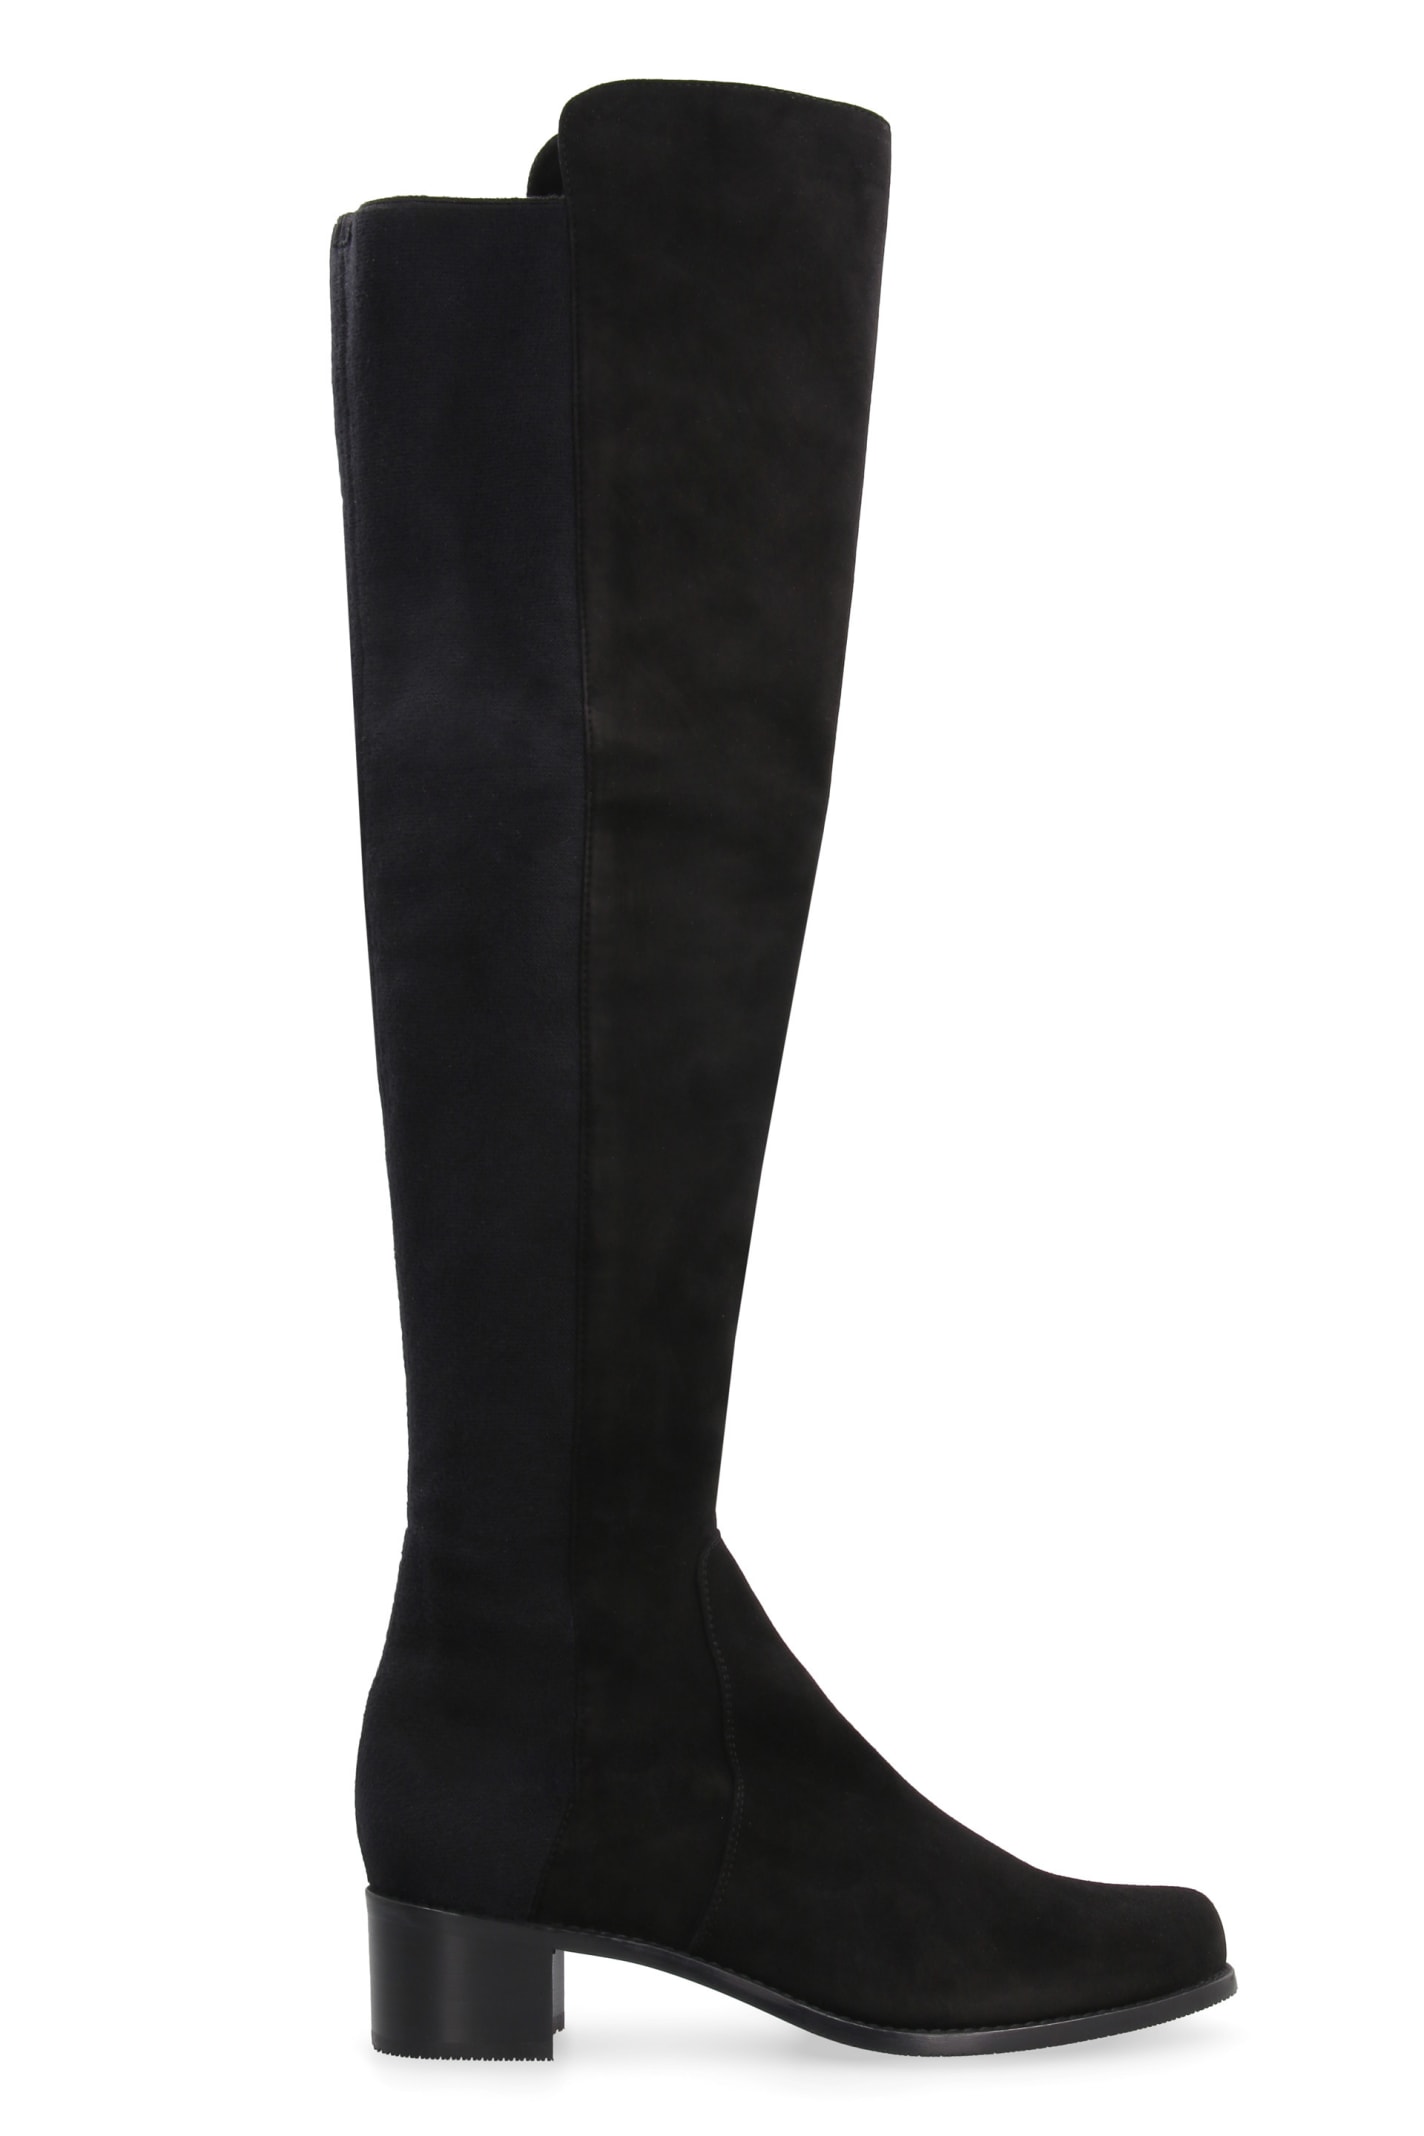 Buy Stuart Weitzman Reserve Suede Over The Knee Boots online, shop Stuart Weitzman shoes with free shipping